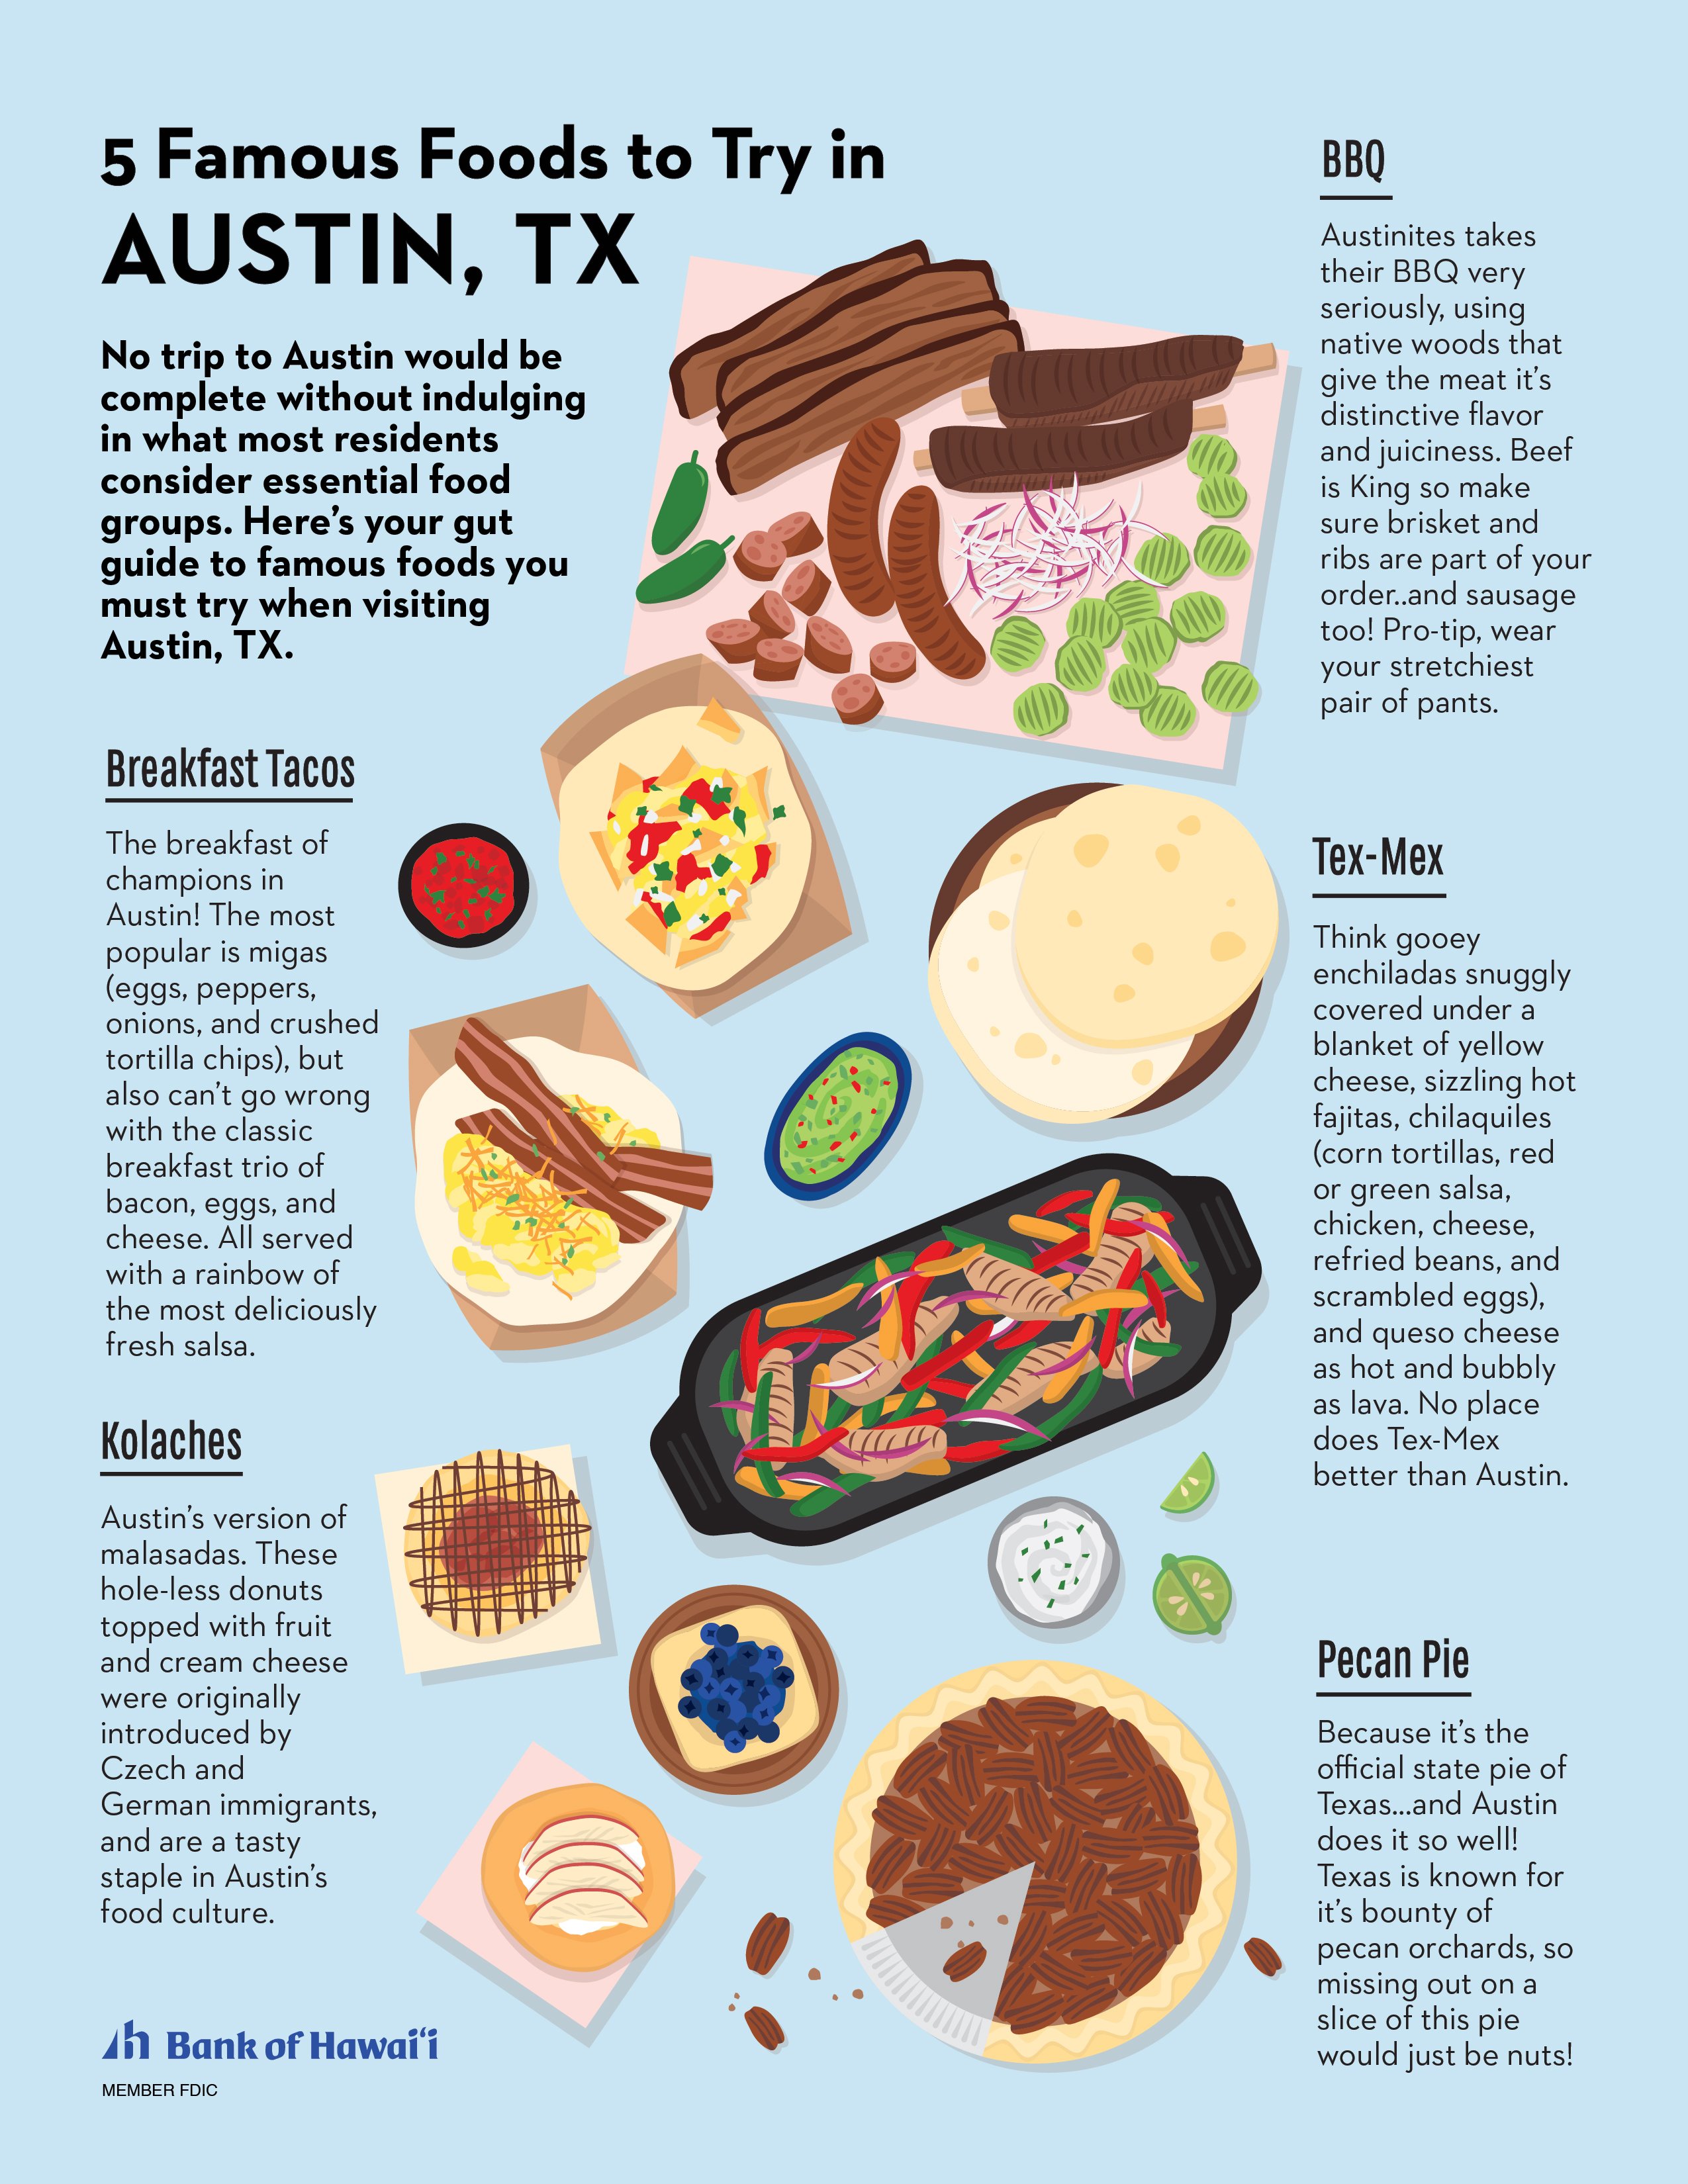 Article-5-famous-foods-to-try-in-austin-tx-infographic.jpg